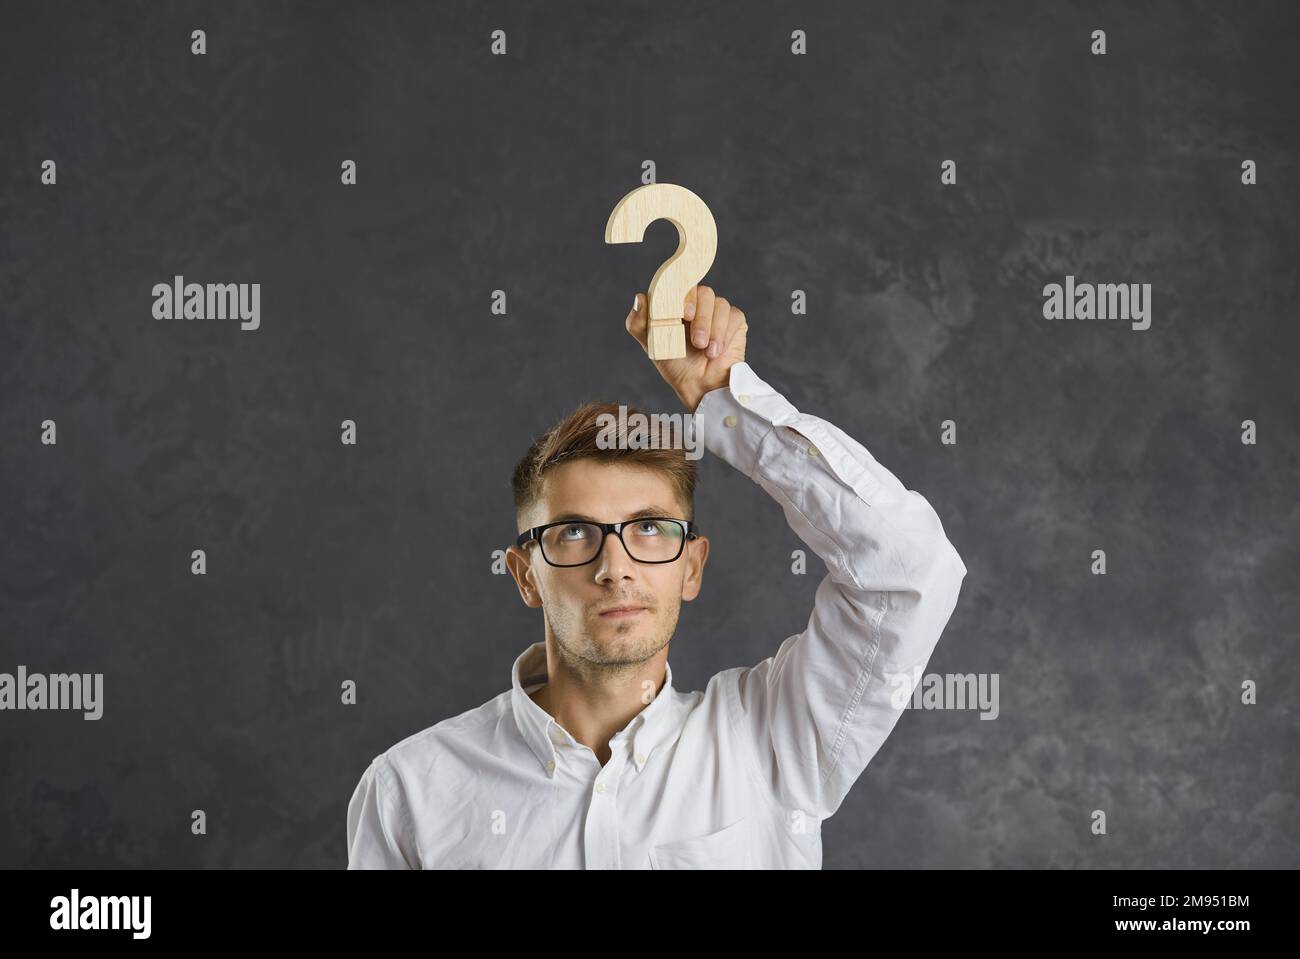 Embarrassed businessman with emotion of doubt on his face holding wooden question mark over his head Stock Photo